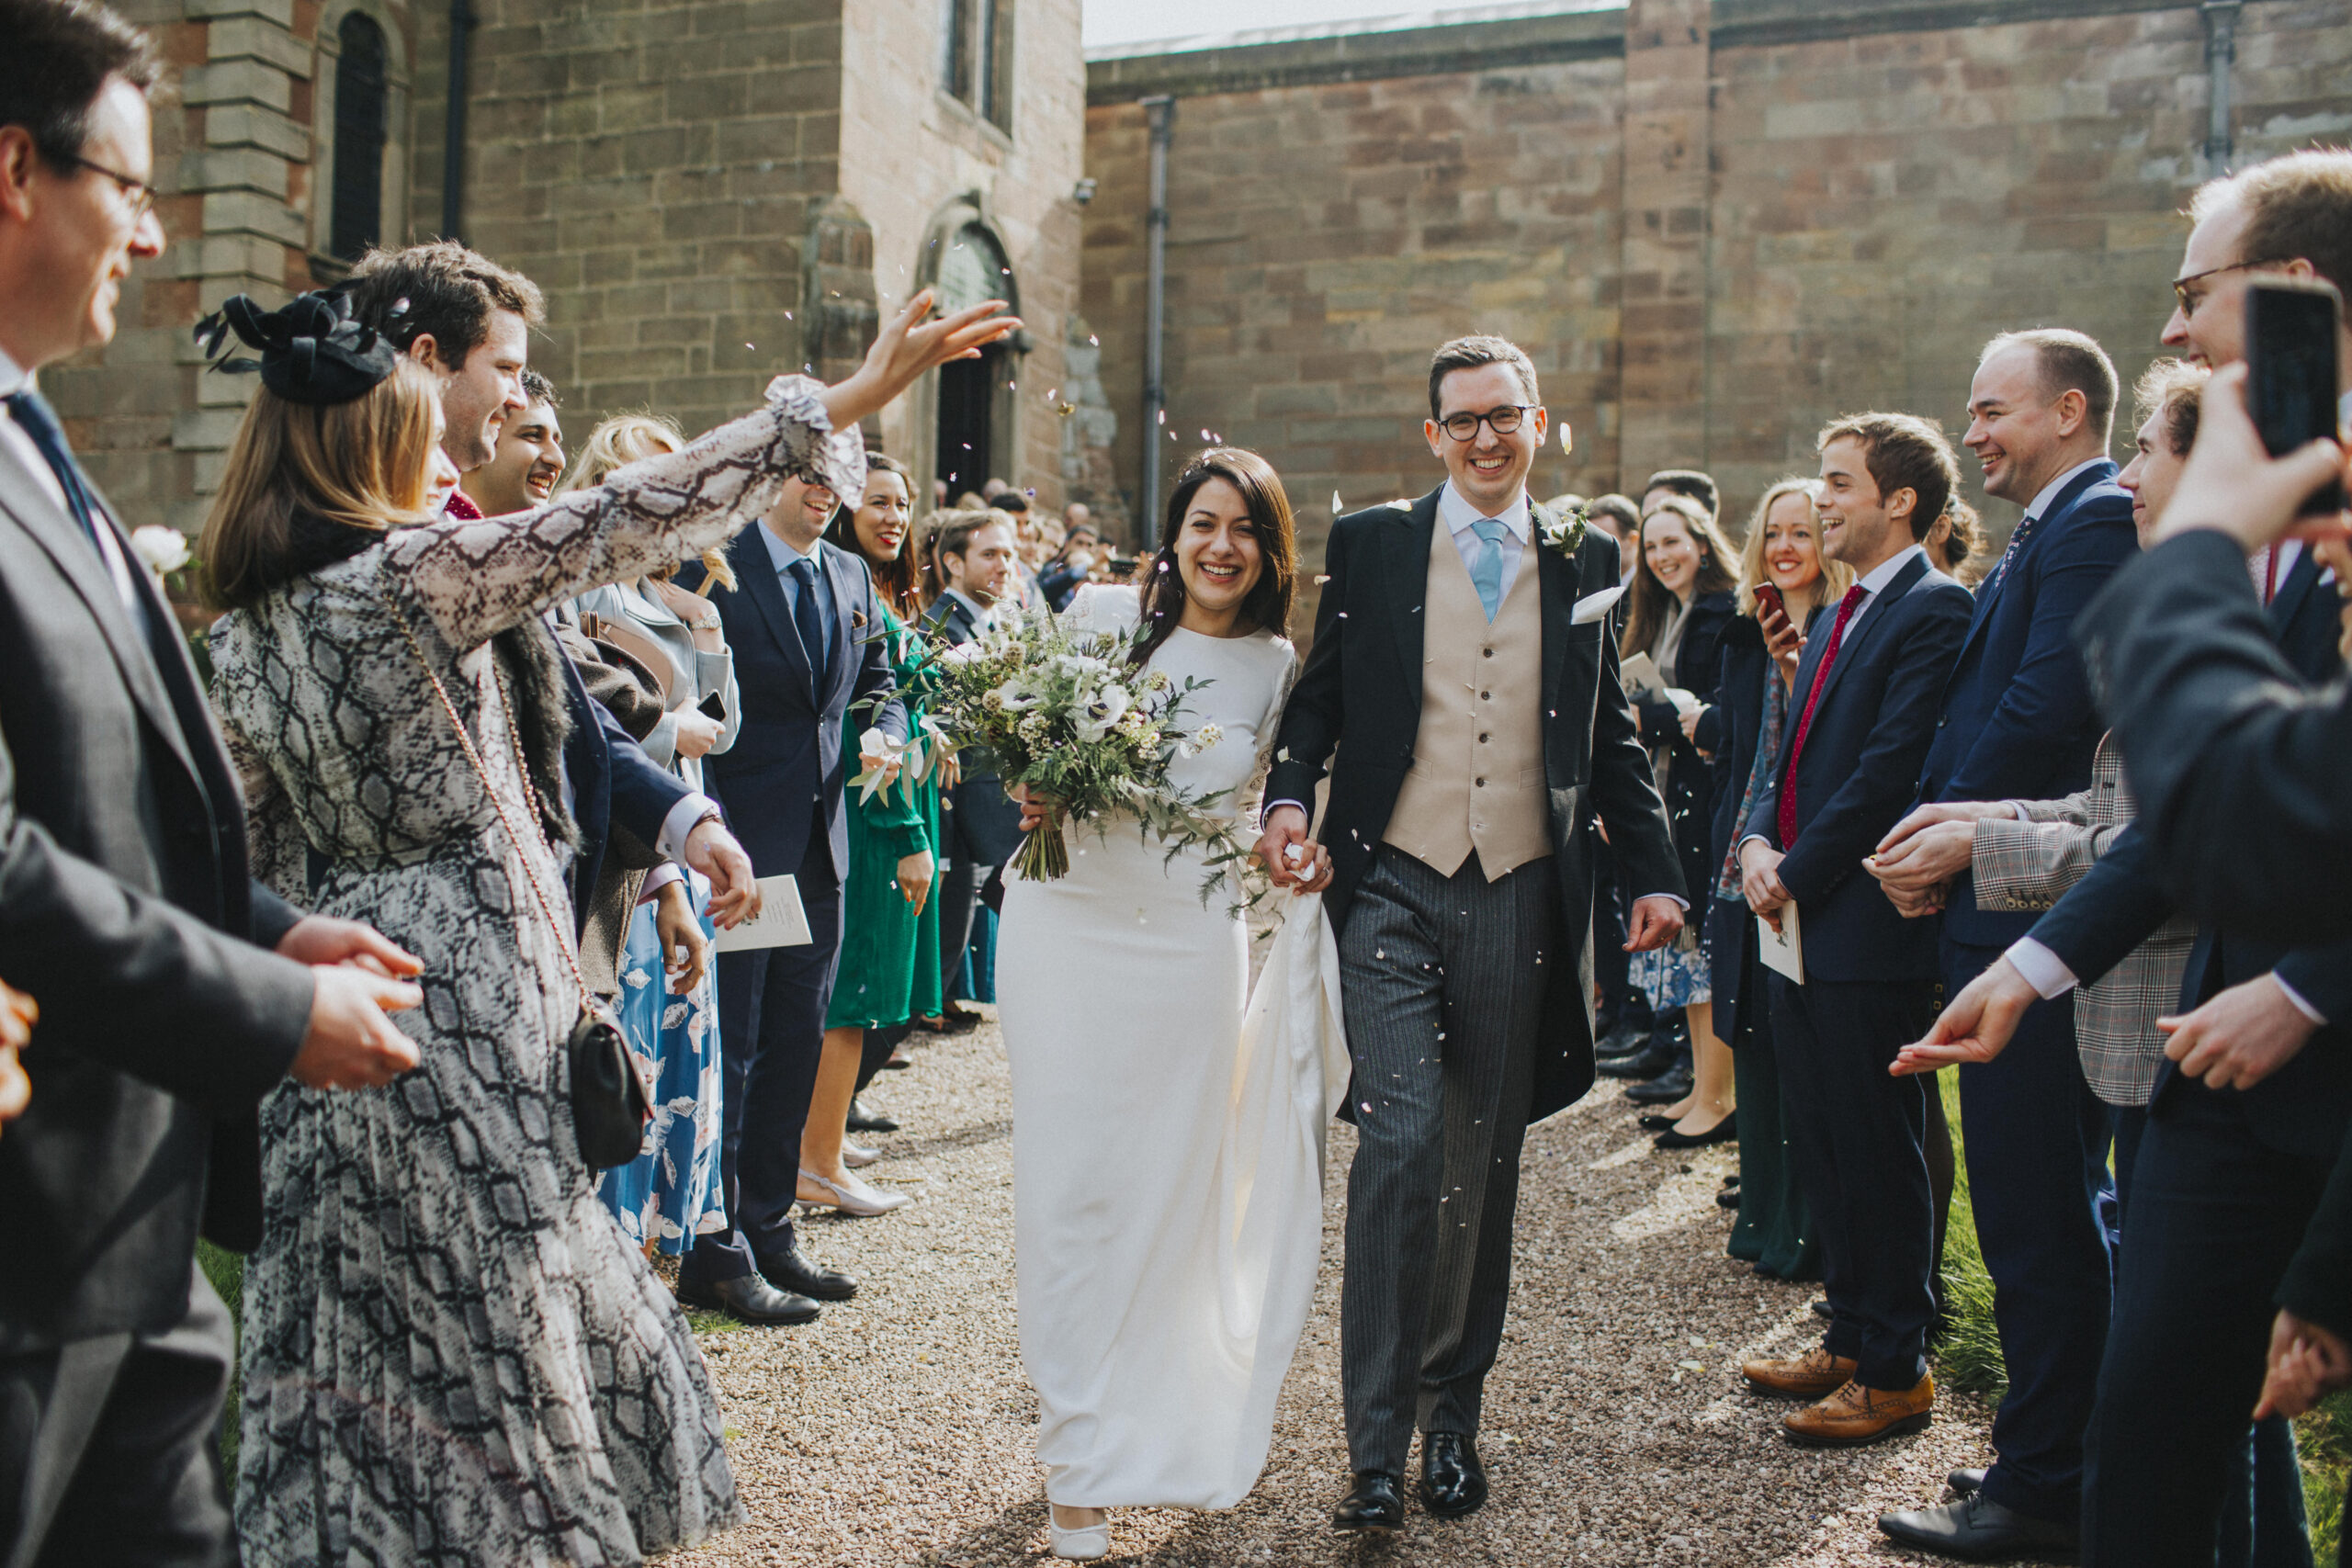 Intimate moments in a springtime celebration at Weston Park